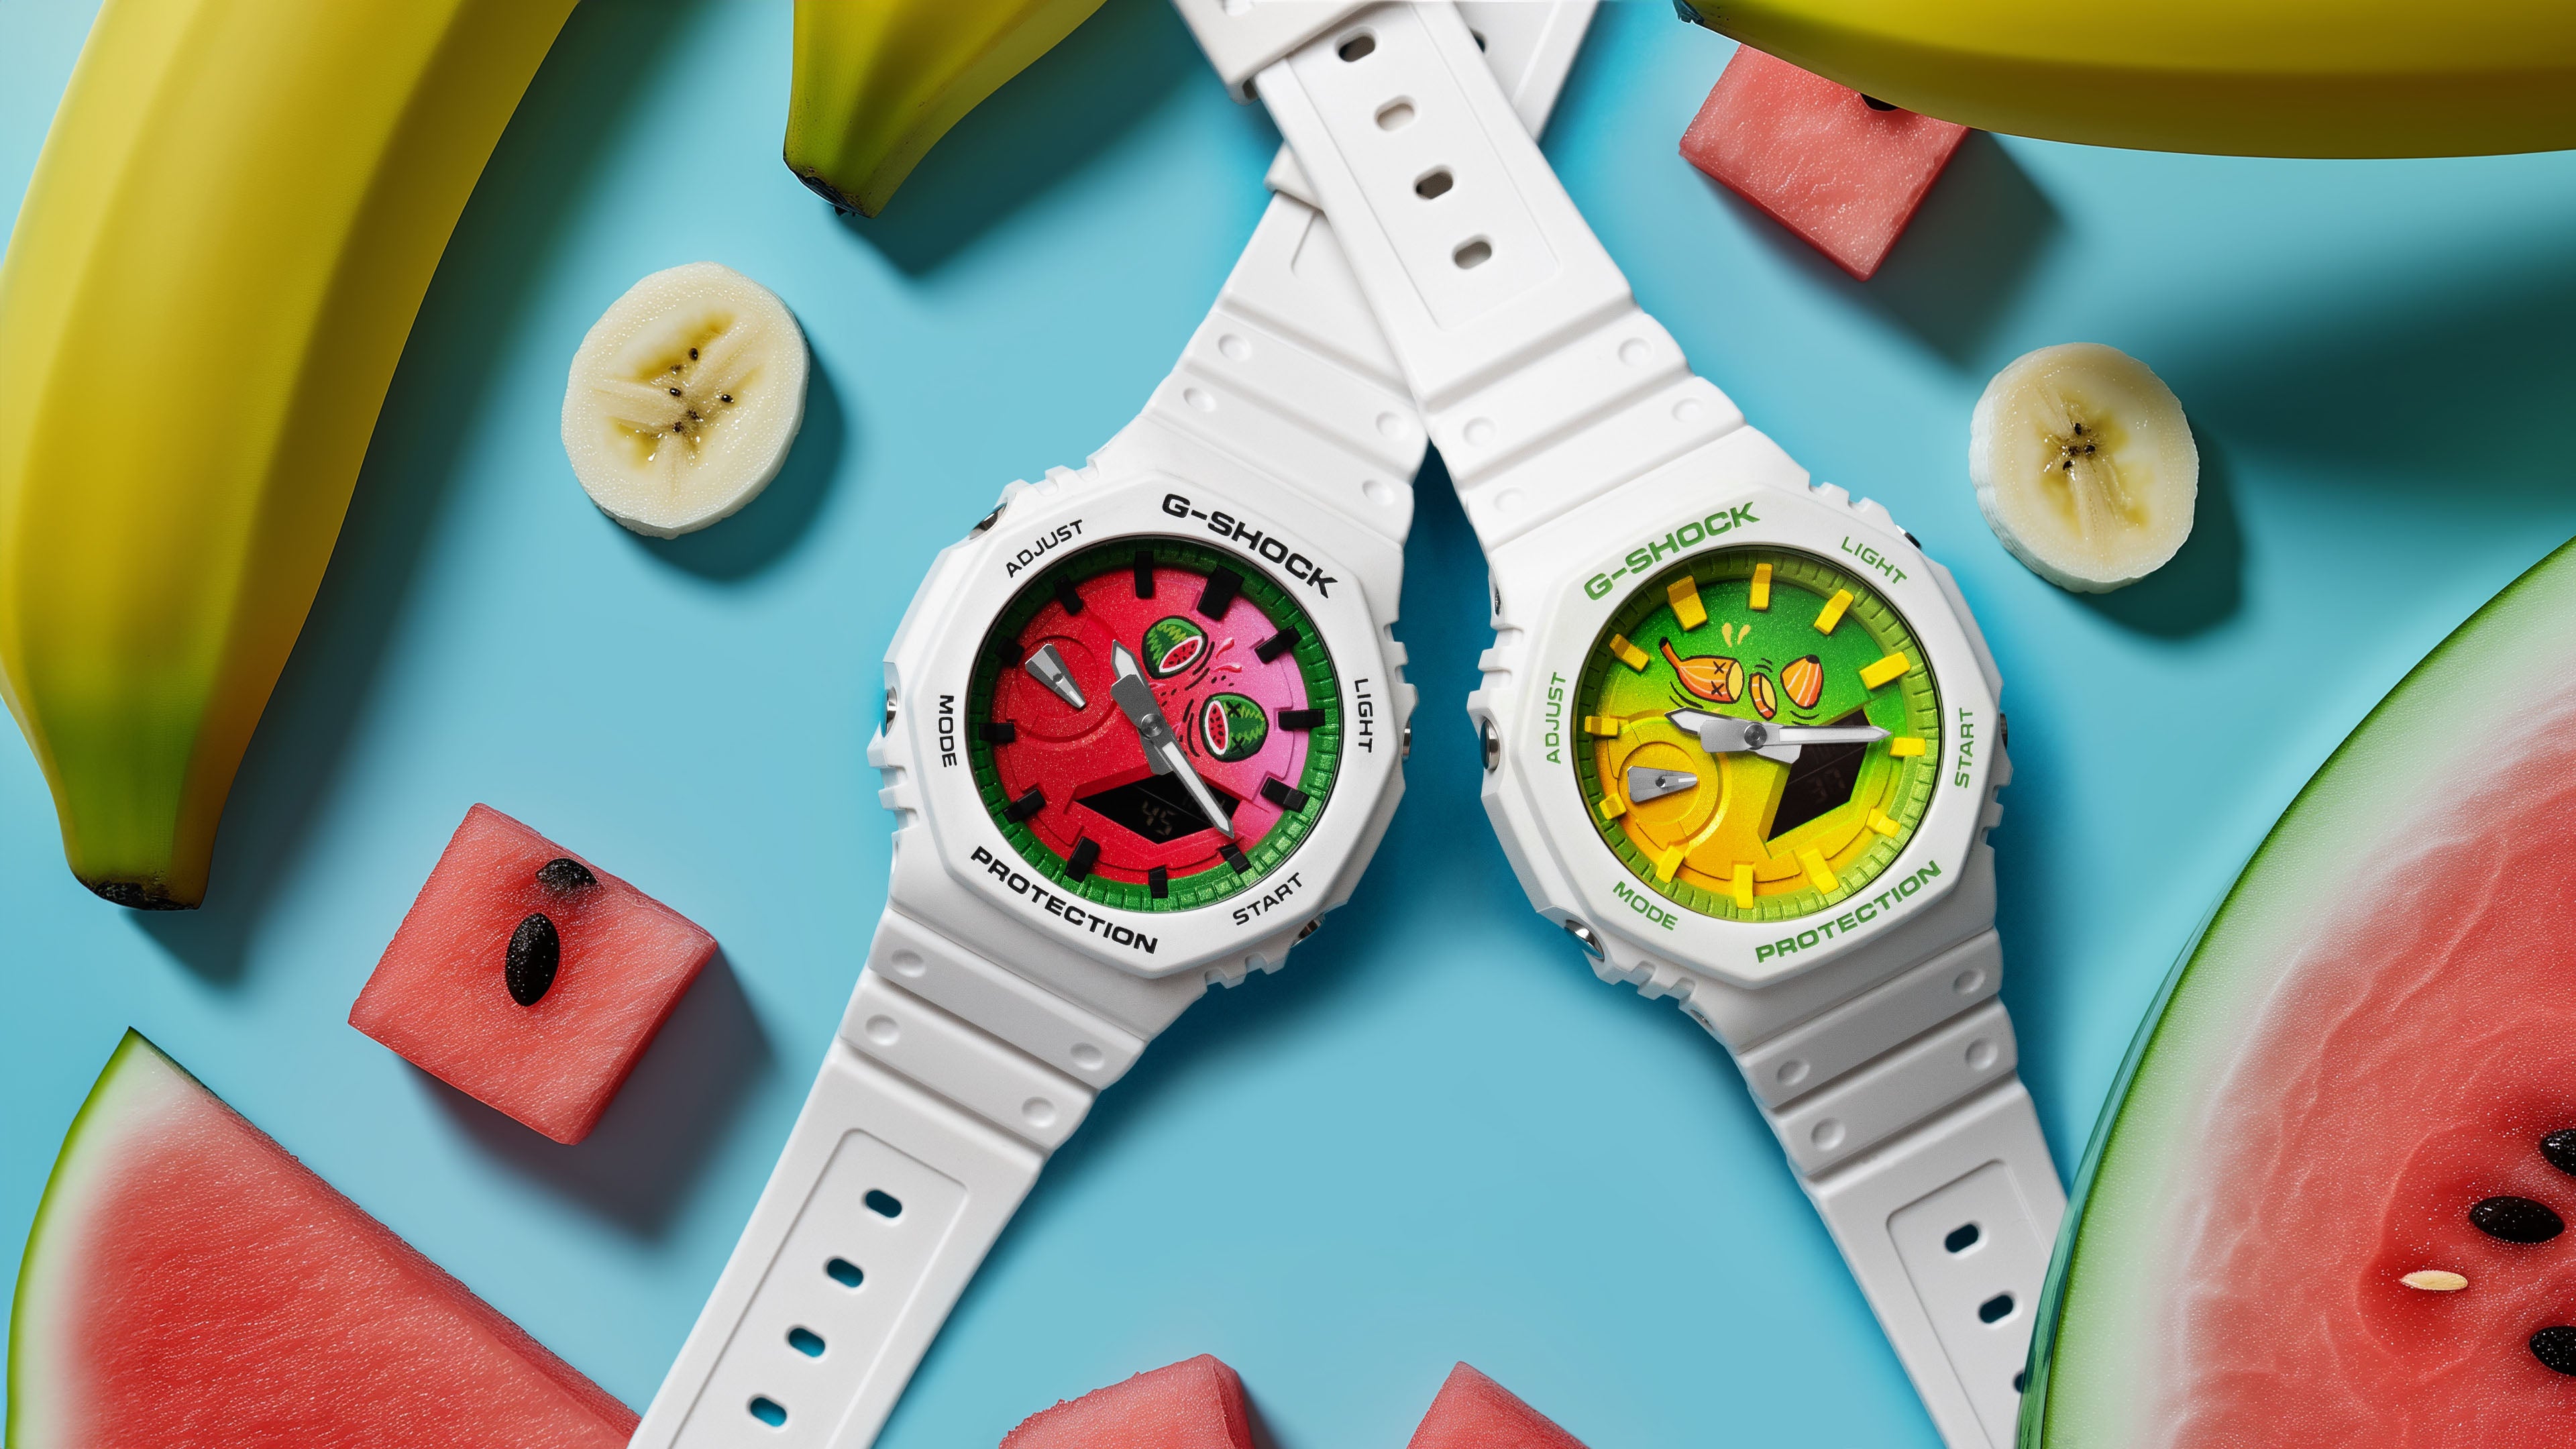 Dynamic duo of G-Shock CasiOak limited editions, featuring the Banana Split and Post Melone watches with hand-painted, fruit-inspired dials for a tasteful timekeeping experience